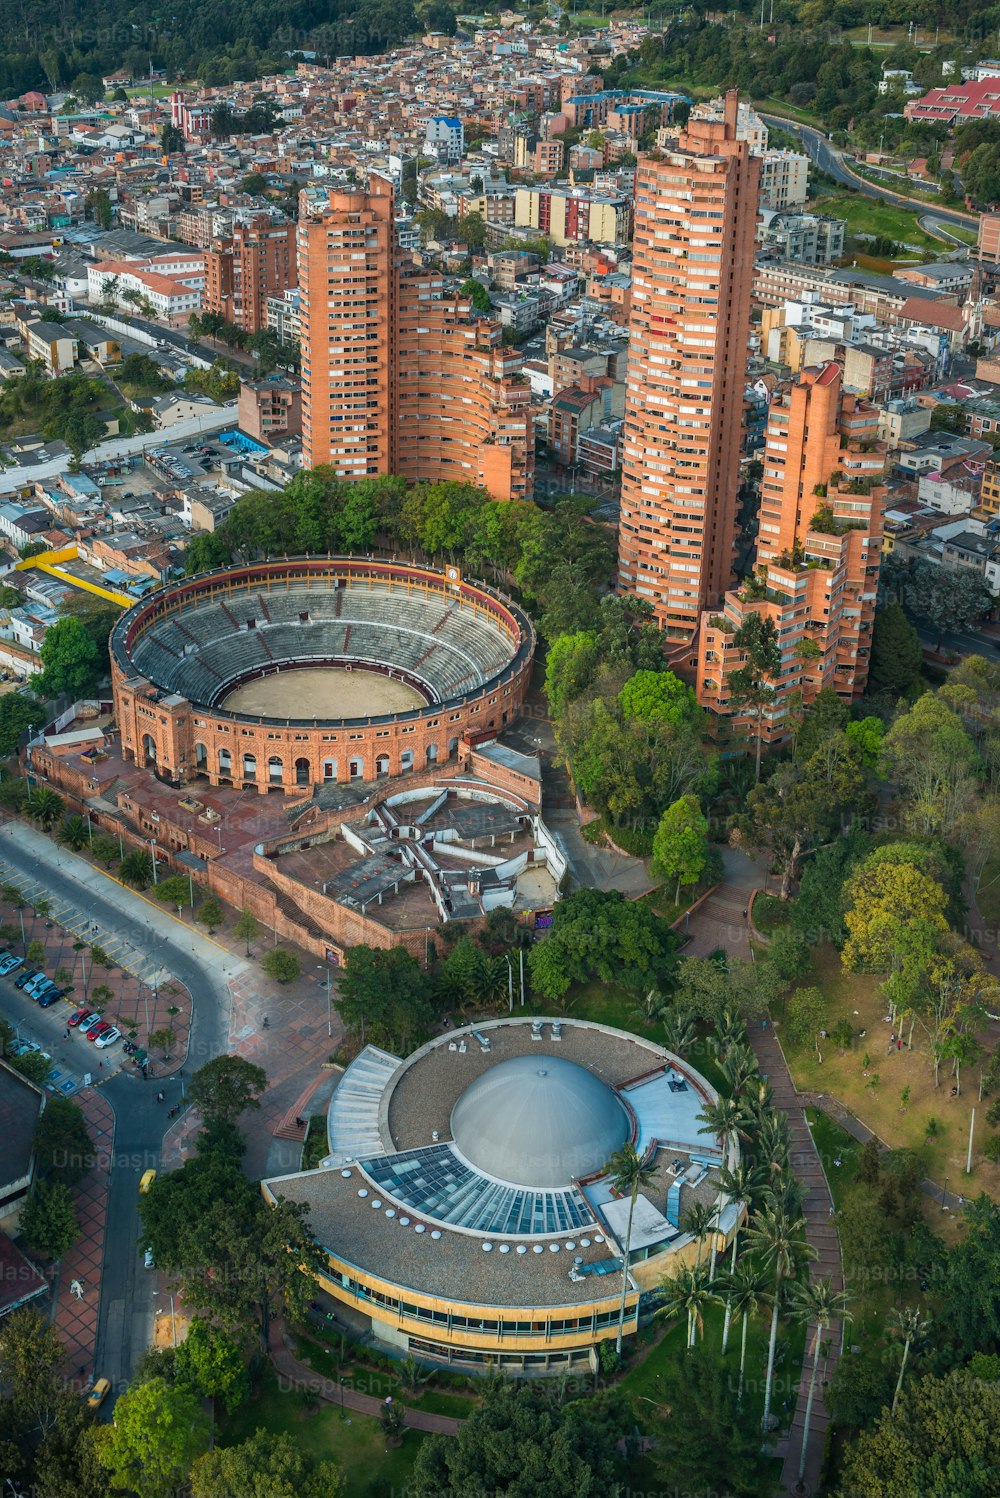 A vertical aerial view of the famous Santamaria Bullfighting arena and the surrounding buildings in Bogota, Colombia